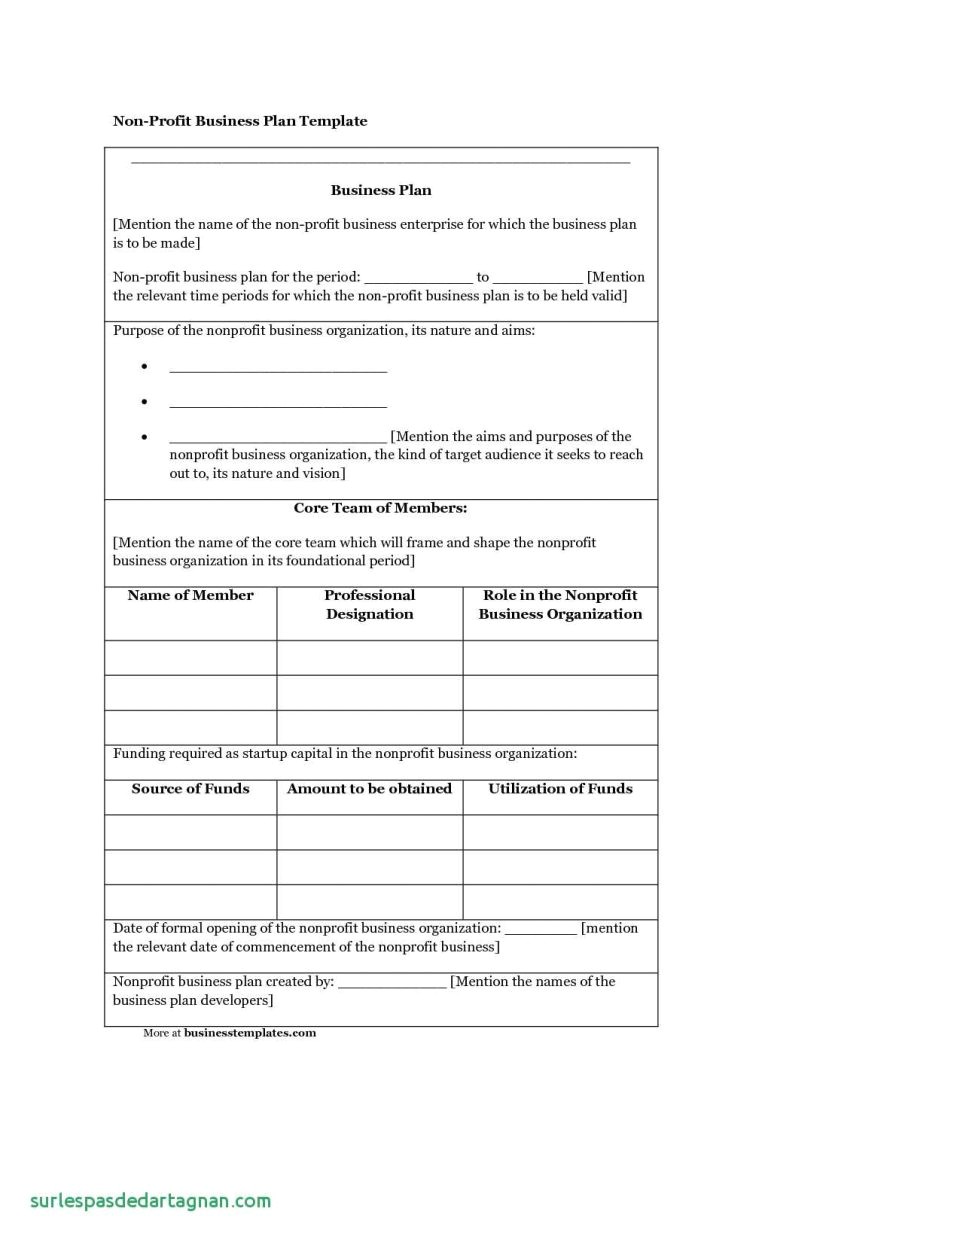 free 501c3 business plan template